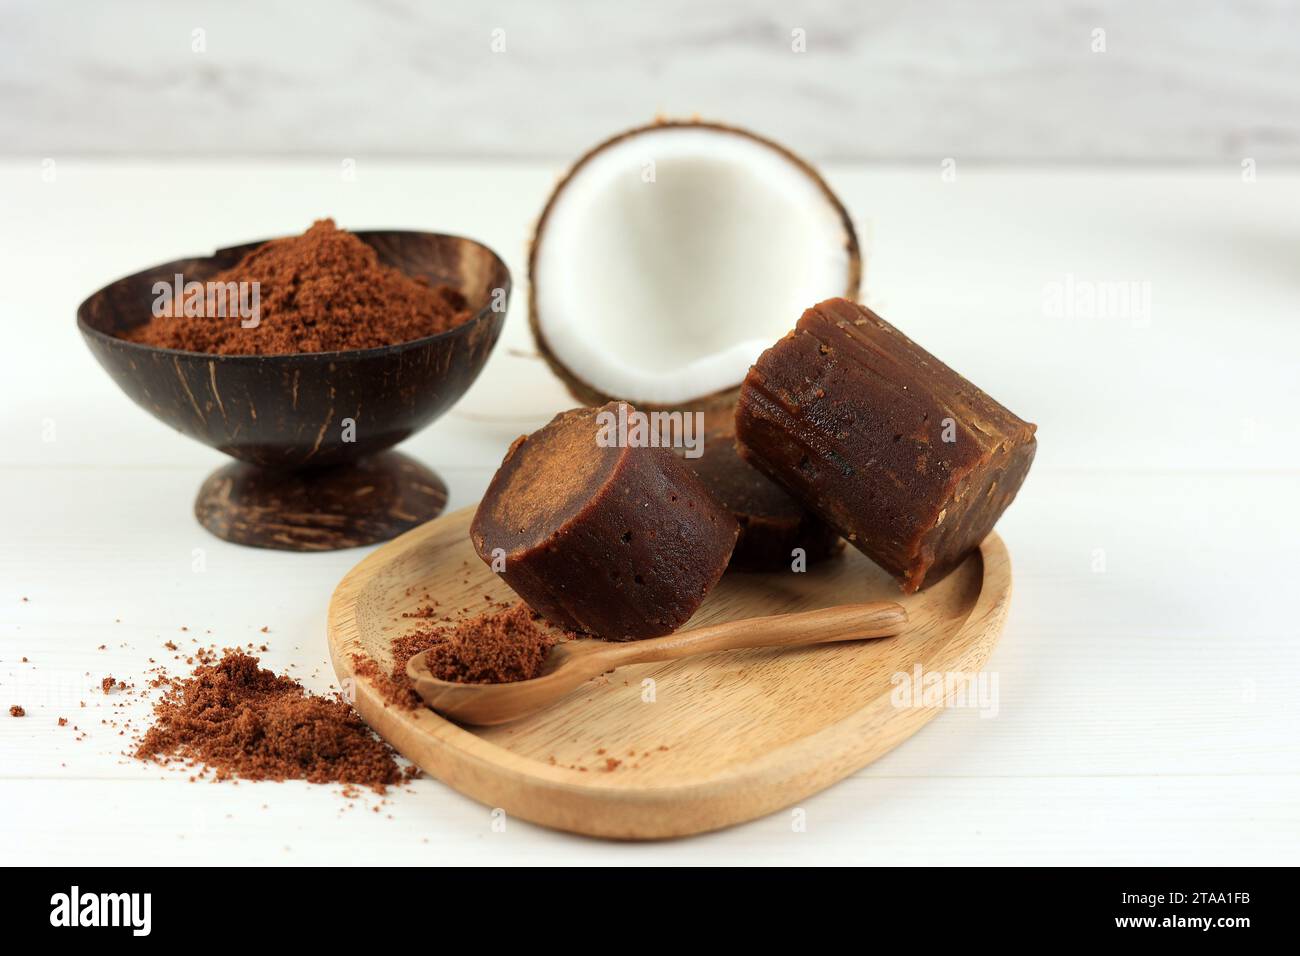 Granular and Block Shape of Prganic Brown Palm Dugar or Coconut Sugar made from Coconut Juice. On White Background Stock Photo